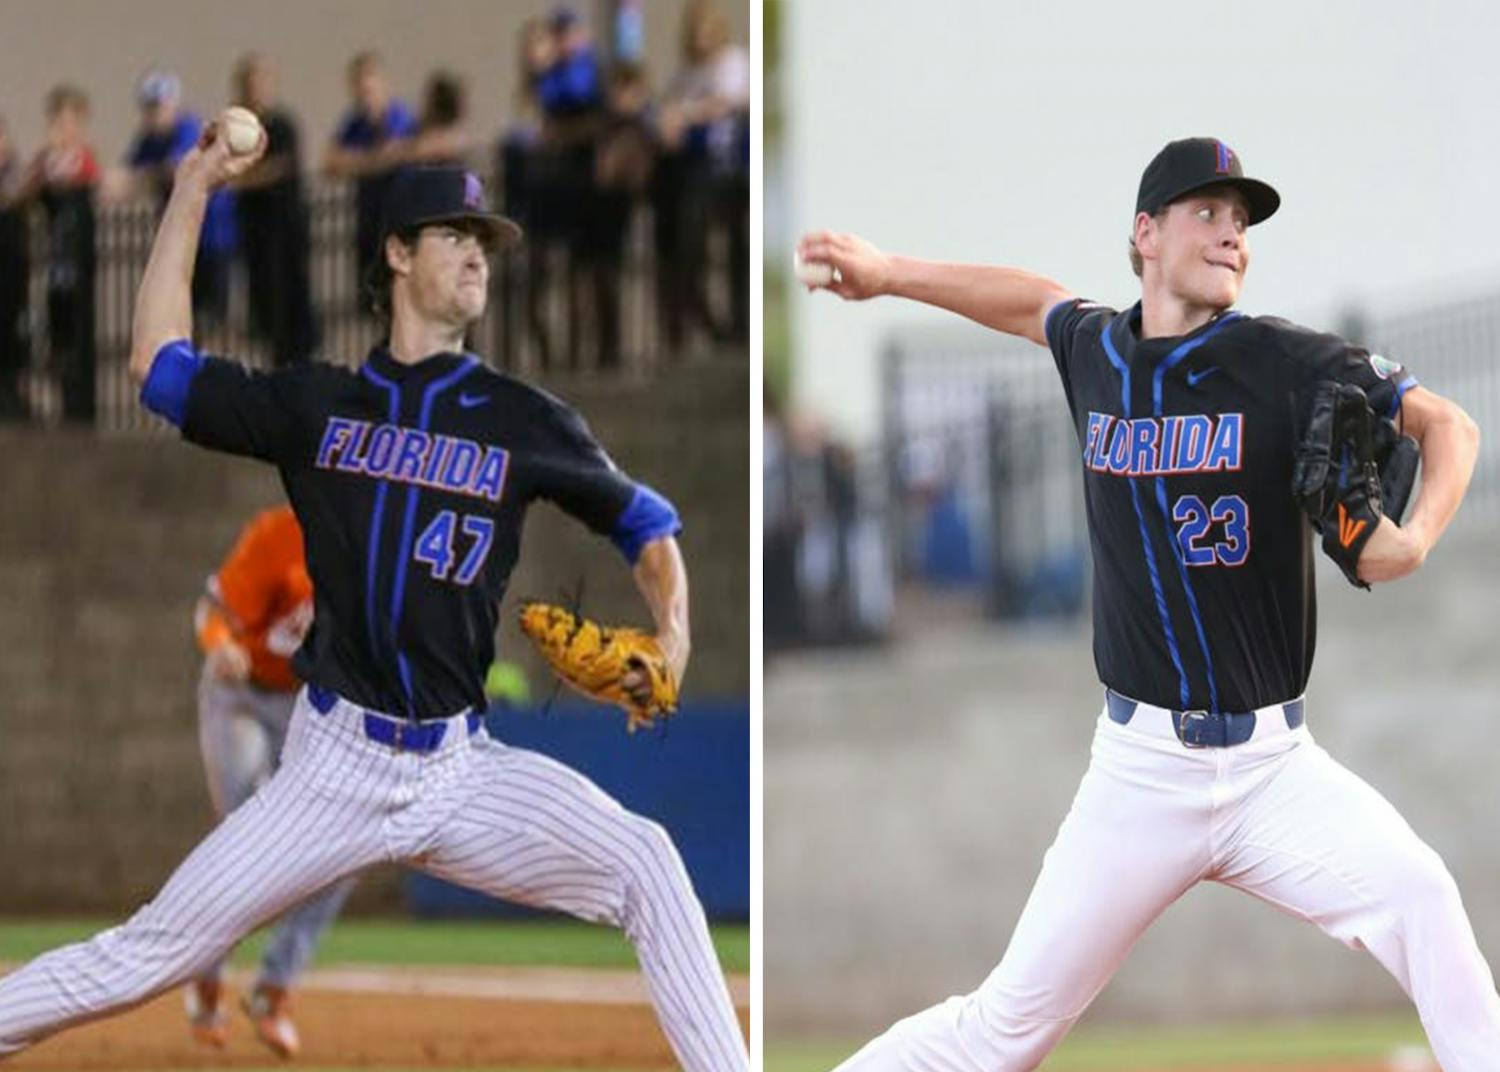 Pitchers Tommy Mace (left) and Jack Leftwich (right) are ready for another season playing baseball for Florida after imagining watching the team as fans.